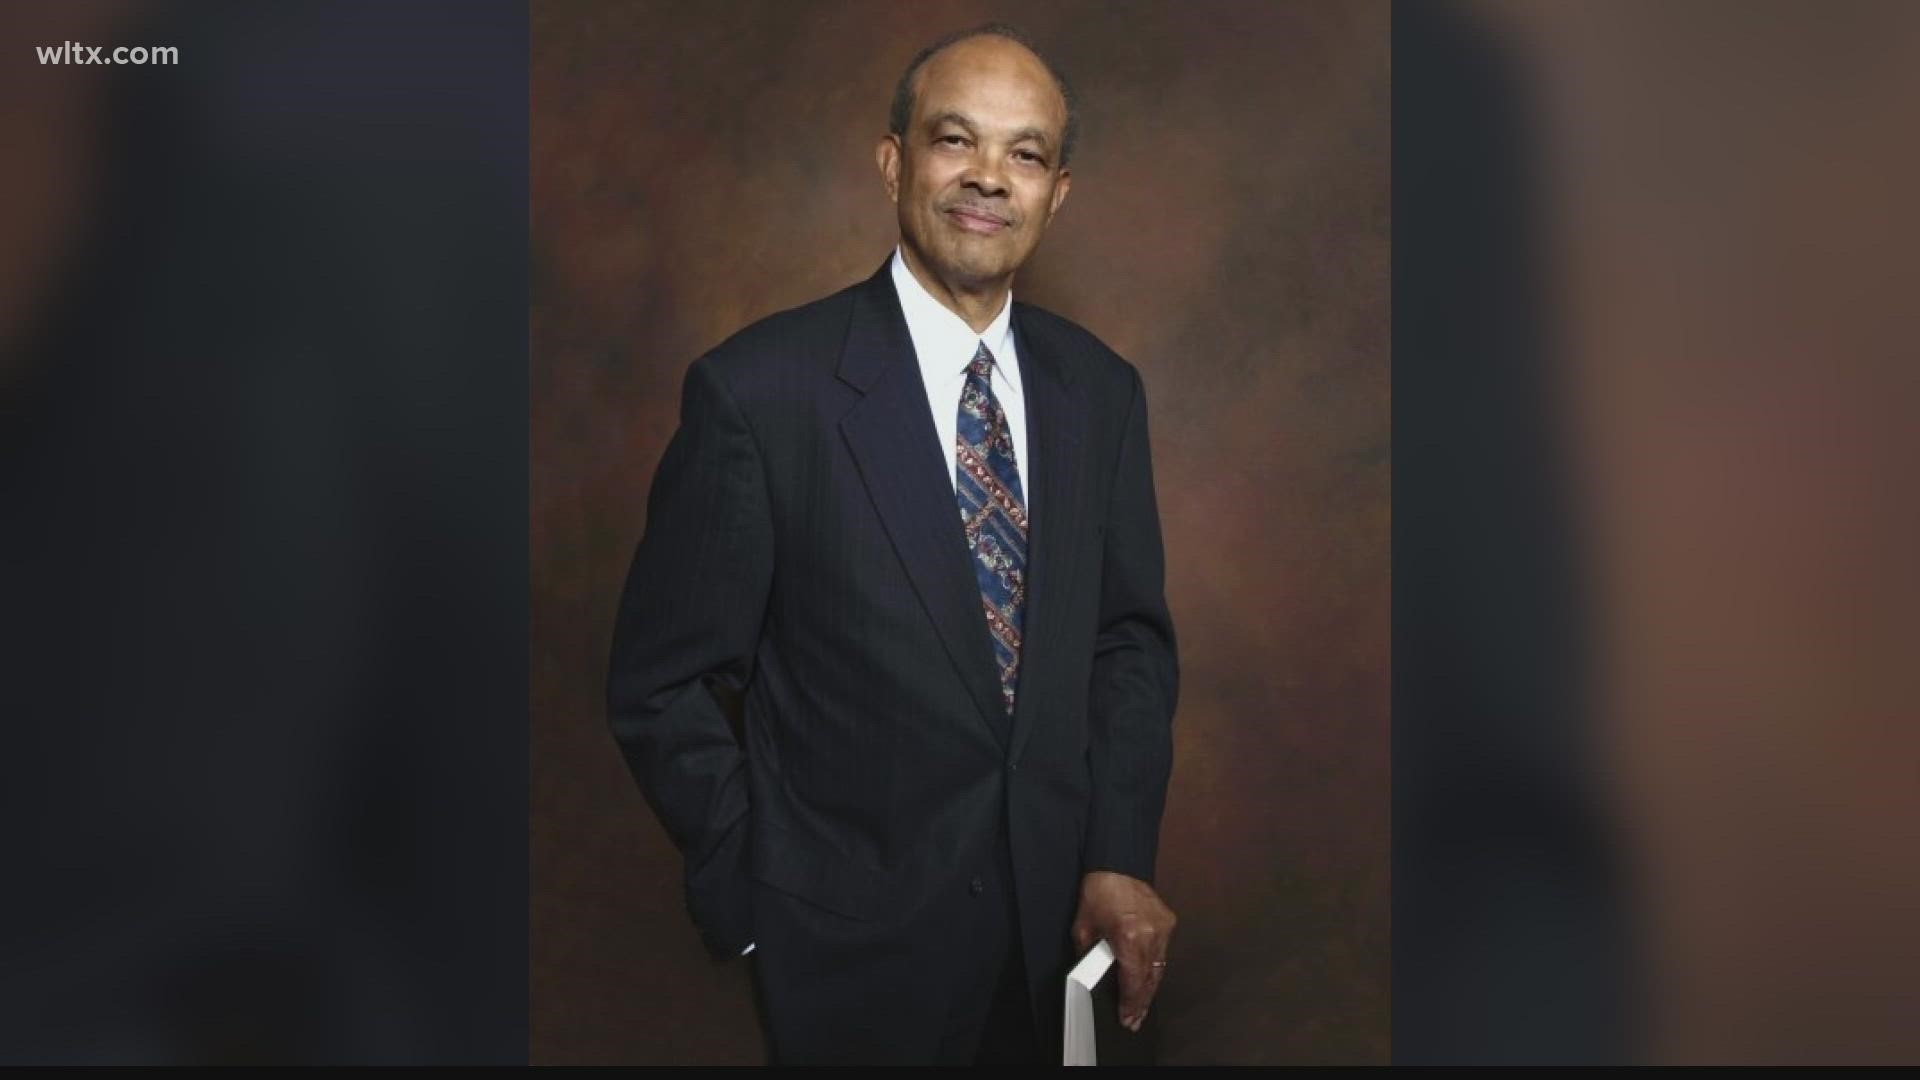 Cureton was the first Black USC law school graduate and appellate judge since Reconstruction.